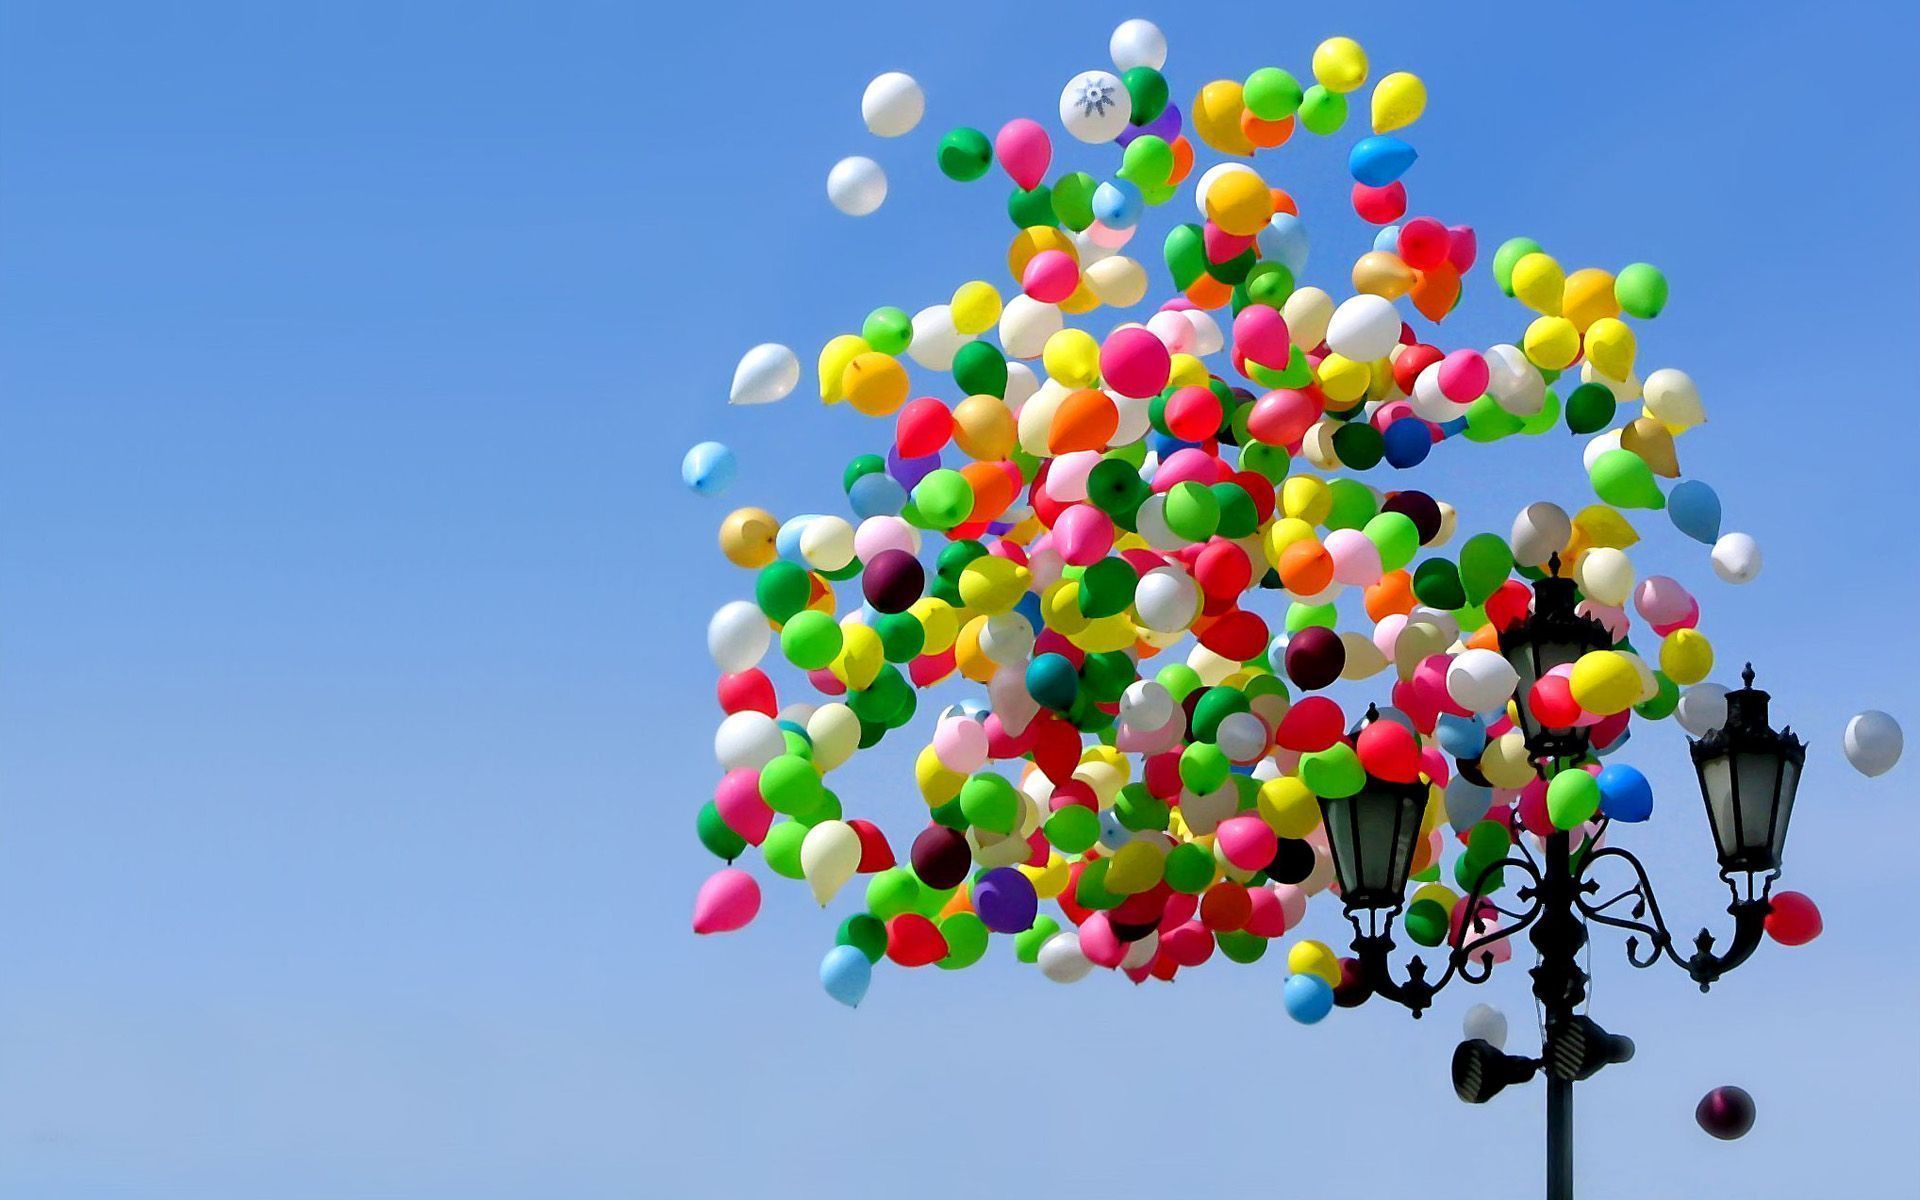 37 Balloon HD Wallpapers Backgrounds - Wallpaper Abyss